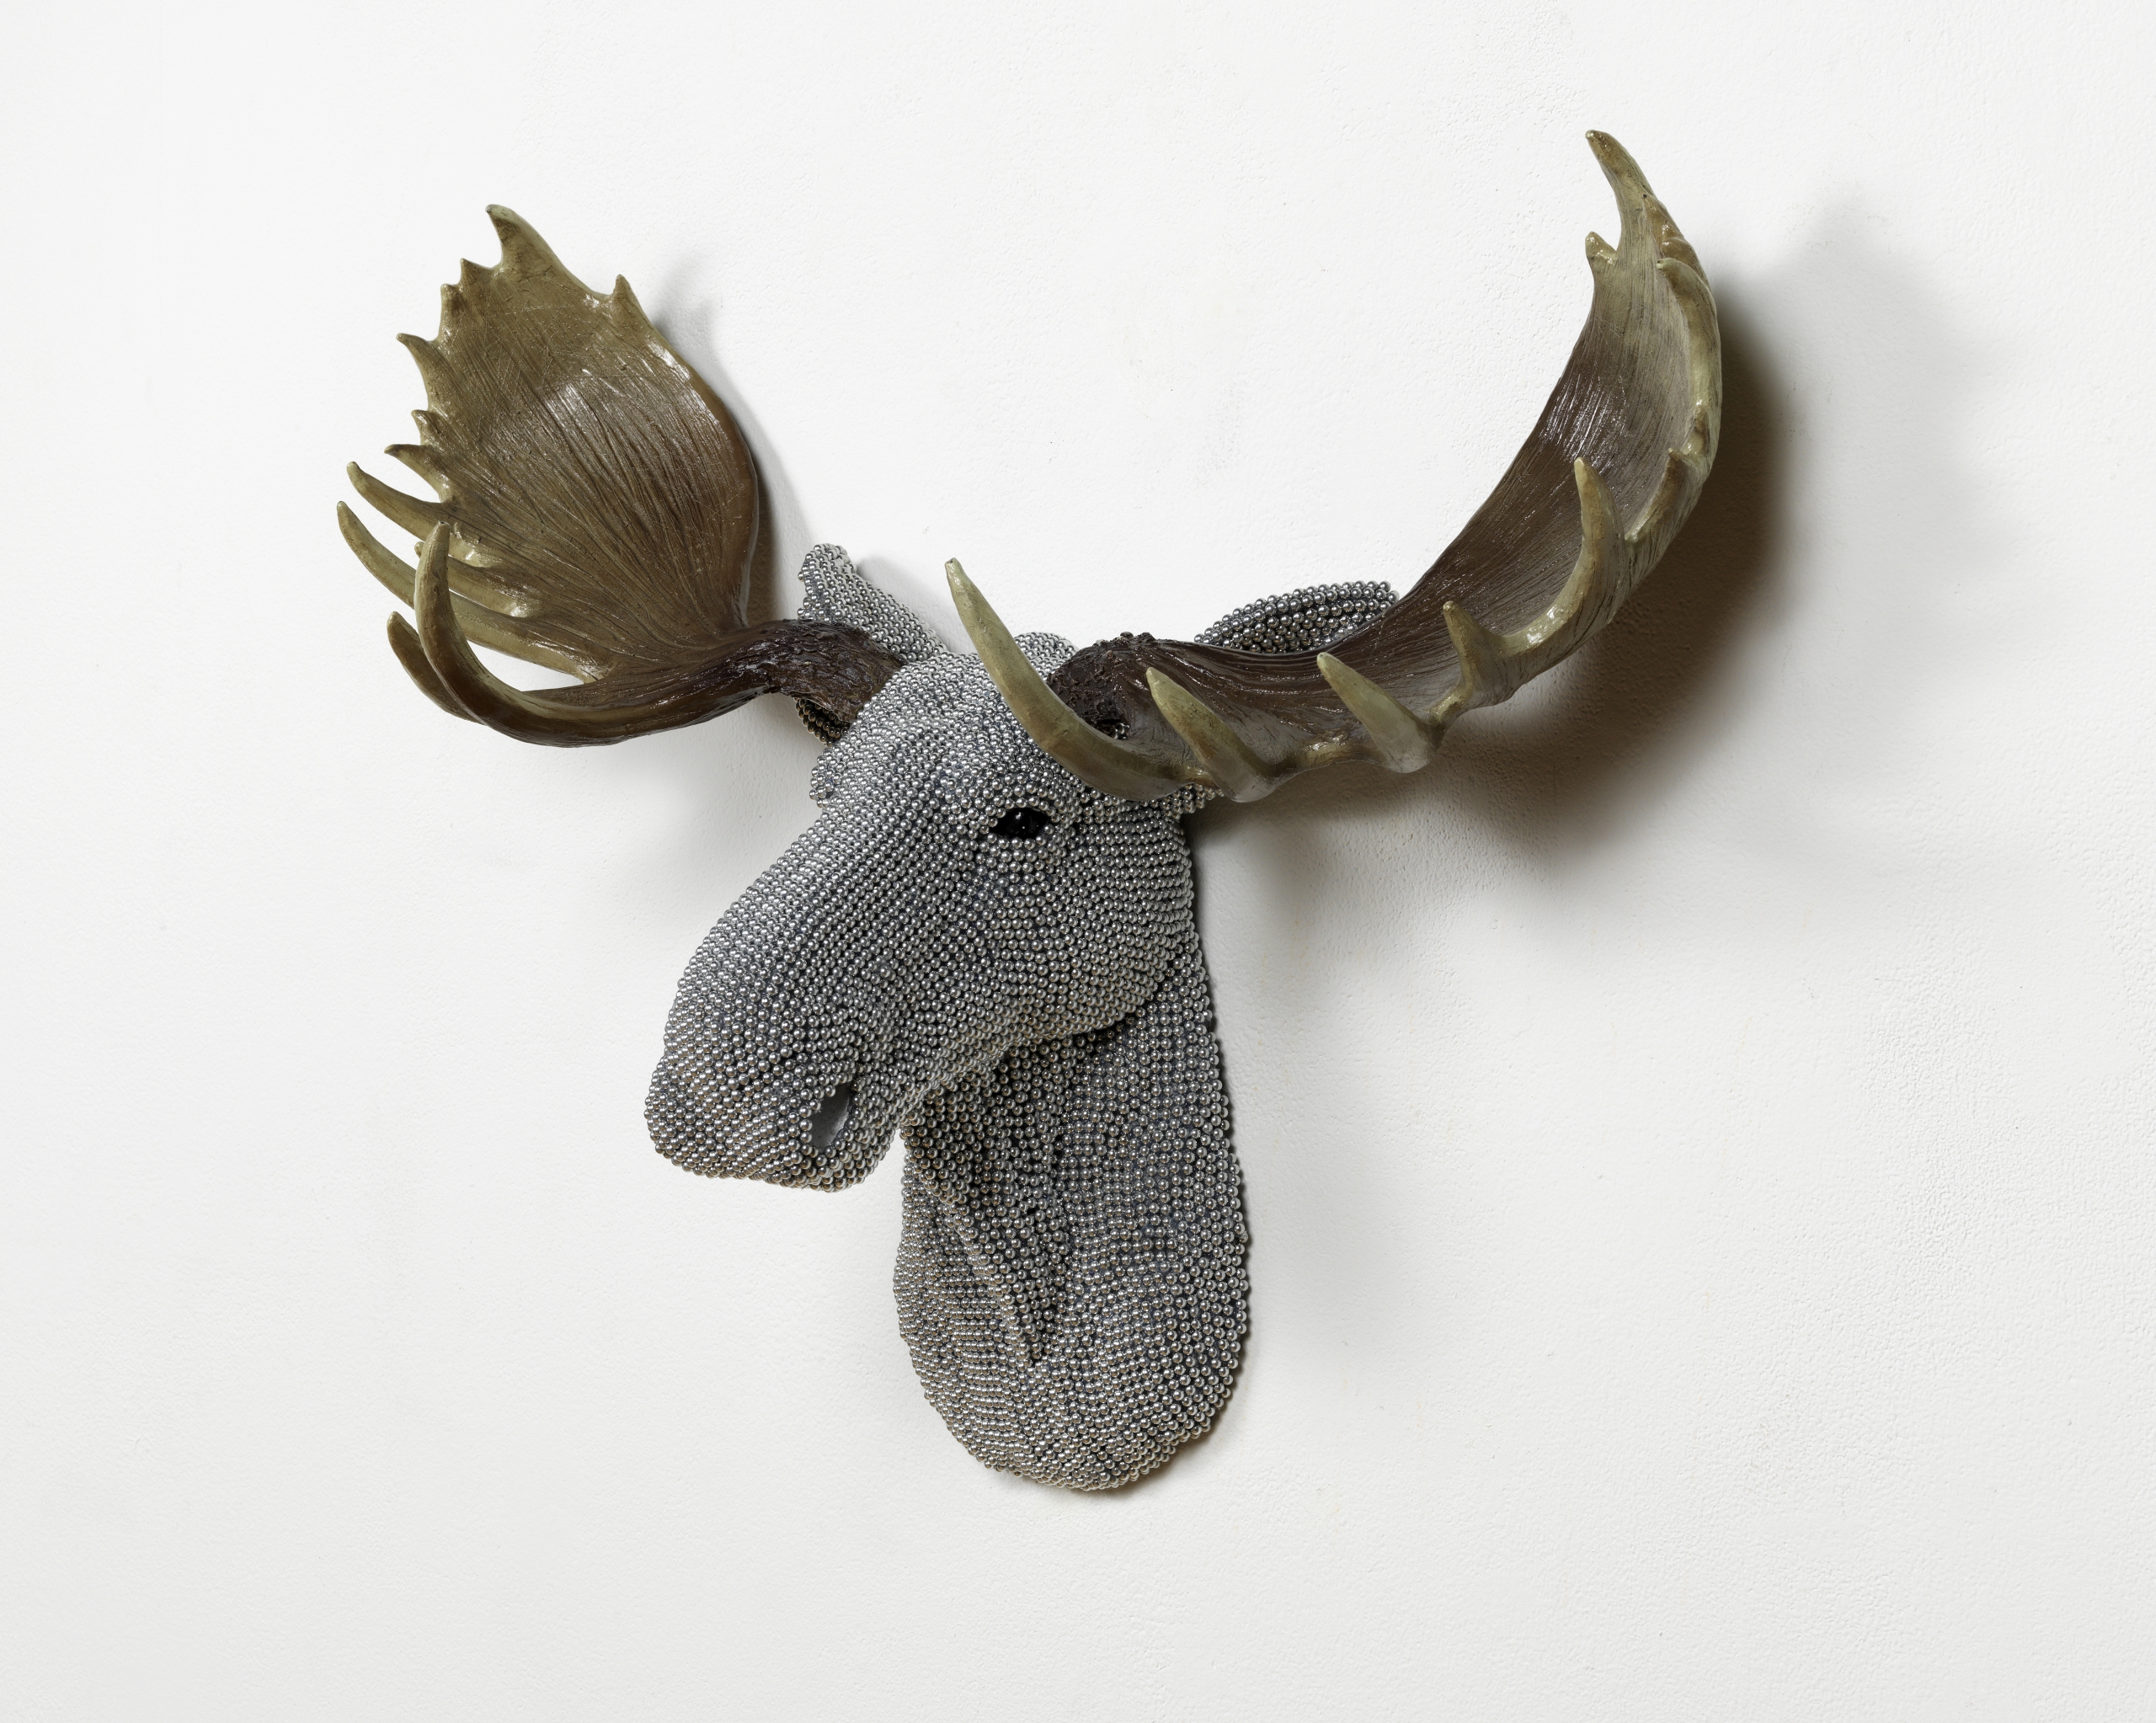 Courtney Timmermans, Moose (side view), 2012, air rifle BBs, cast resin, mixed media, 20 x 24 x 9 in.